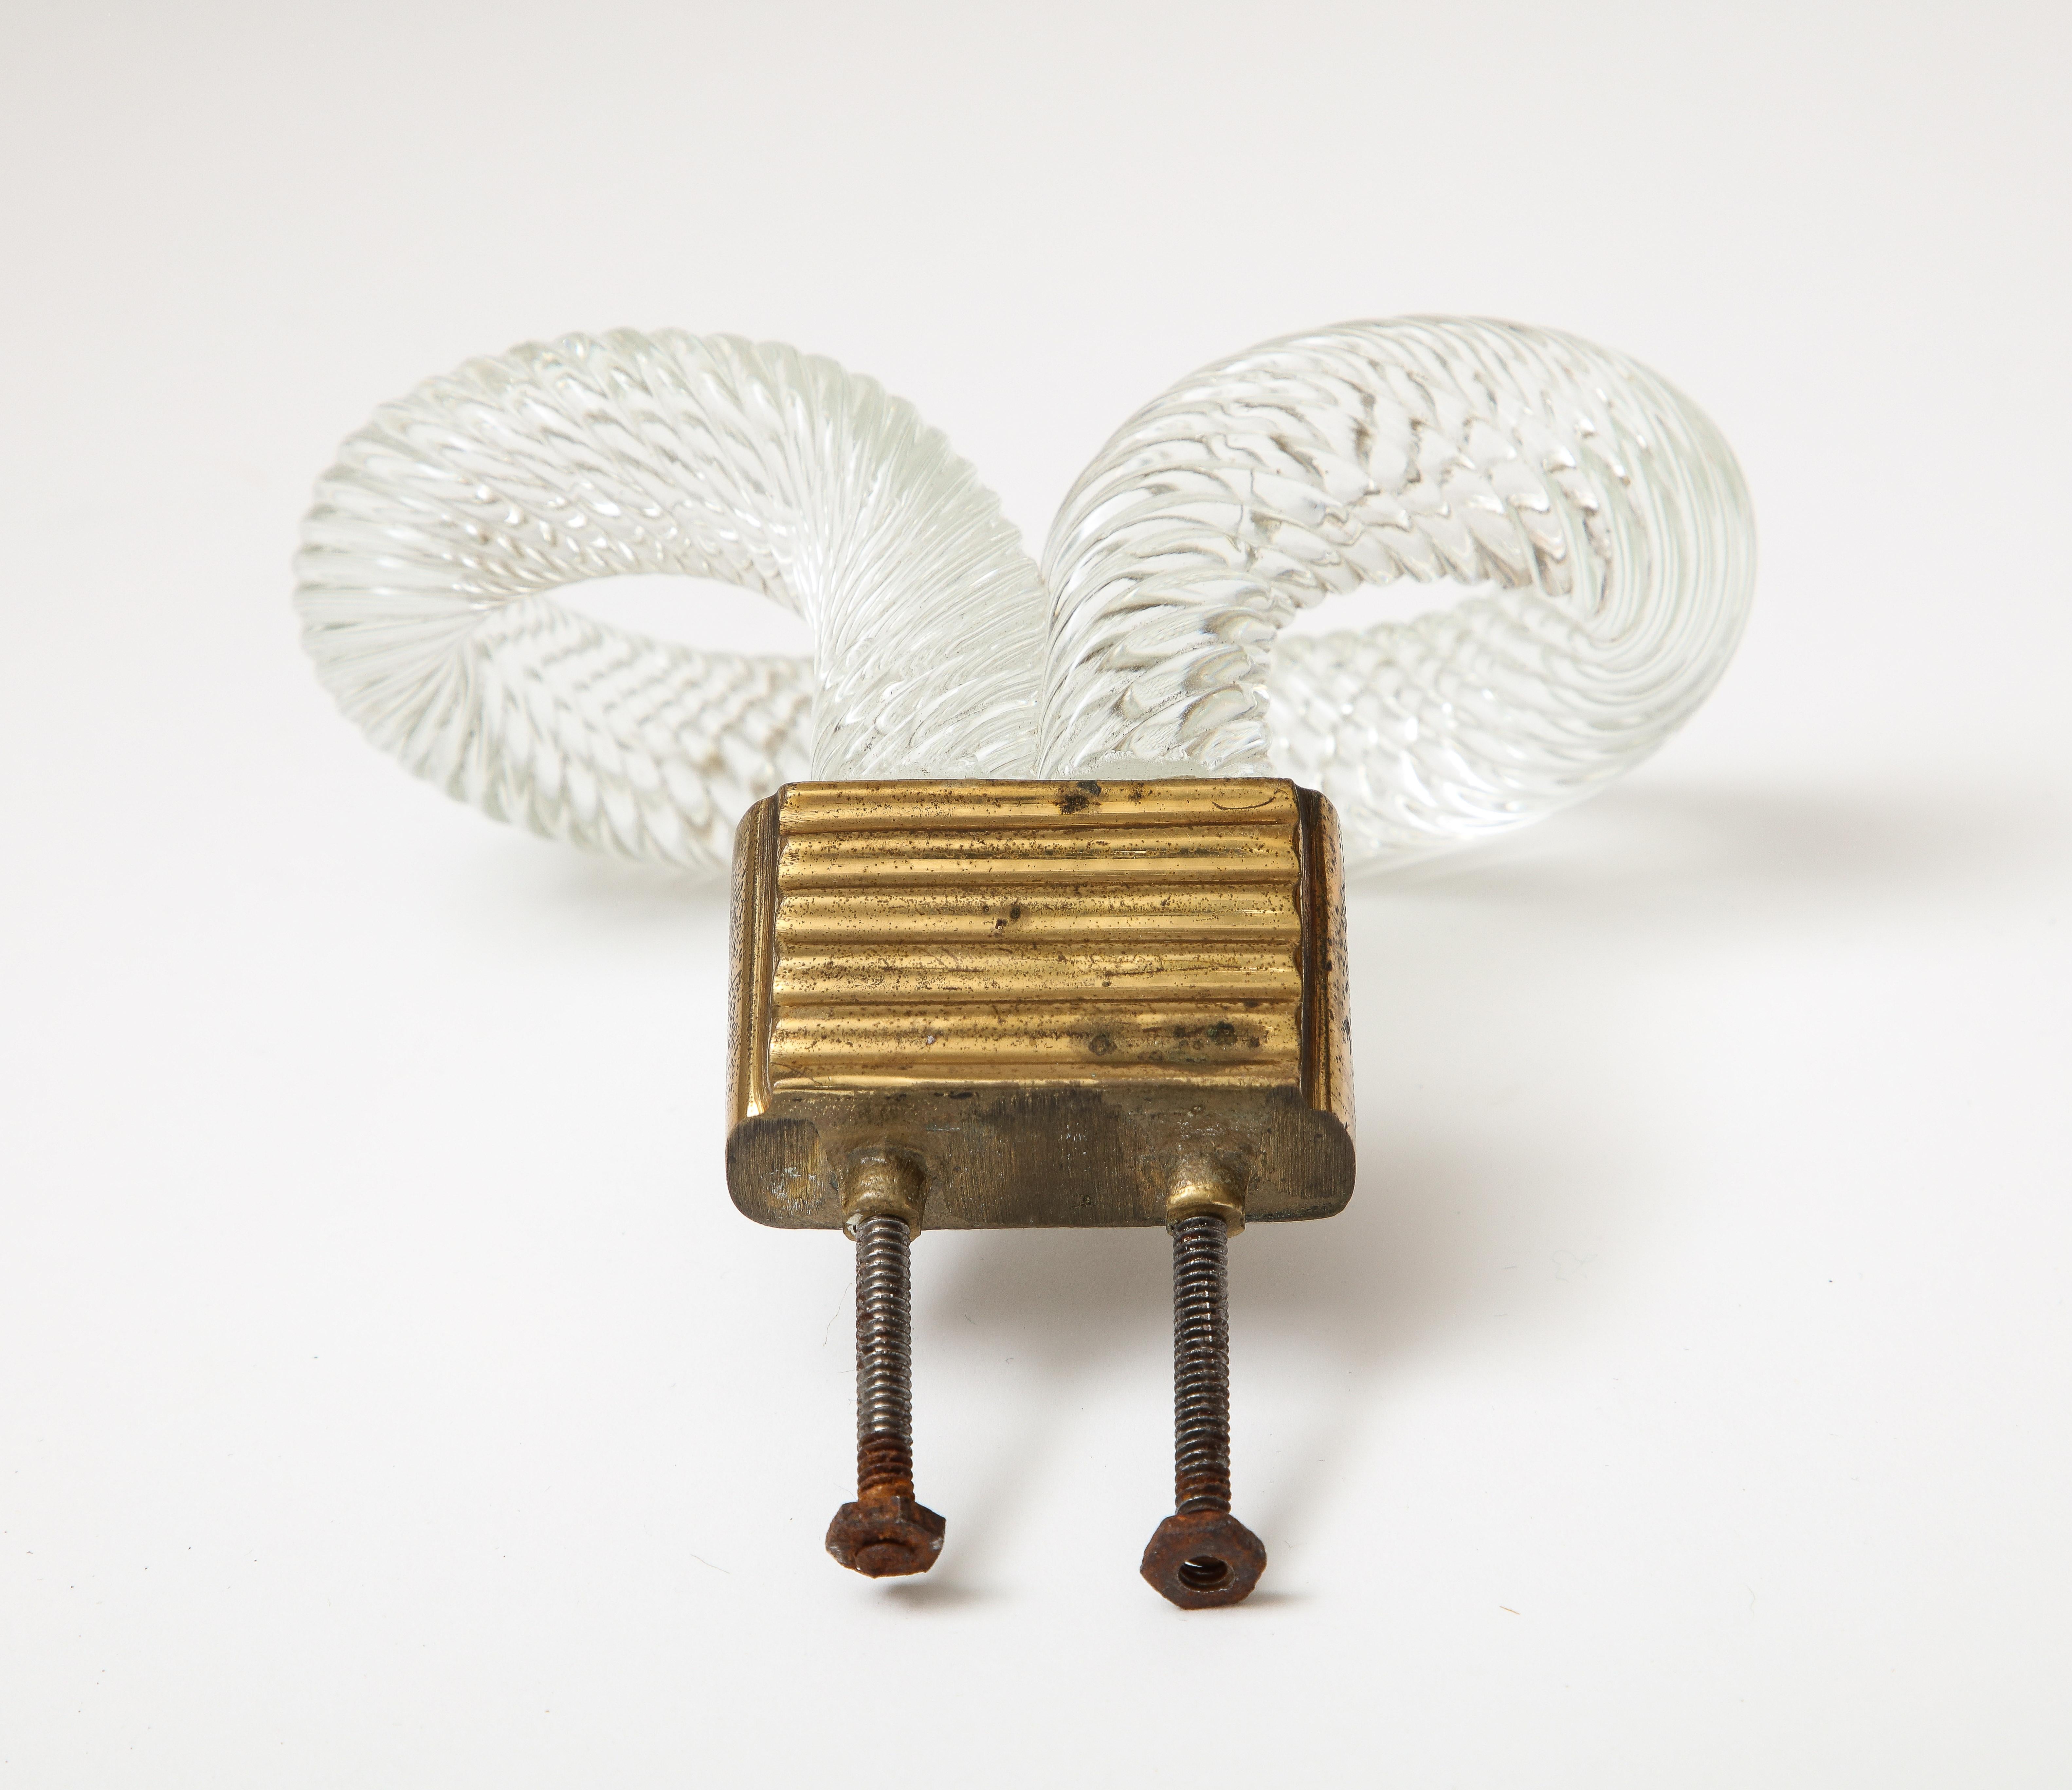 Glass and Brass Hook/Door Pull Attributed to Carlo Scarpa, Italy, c. 1940 For Sale 8